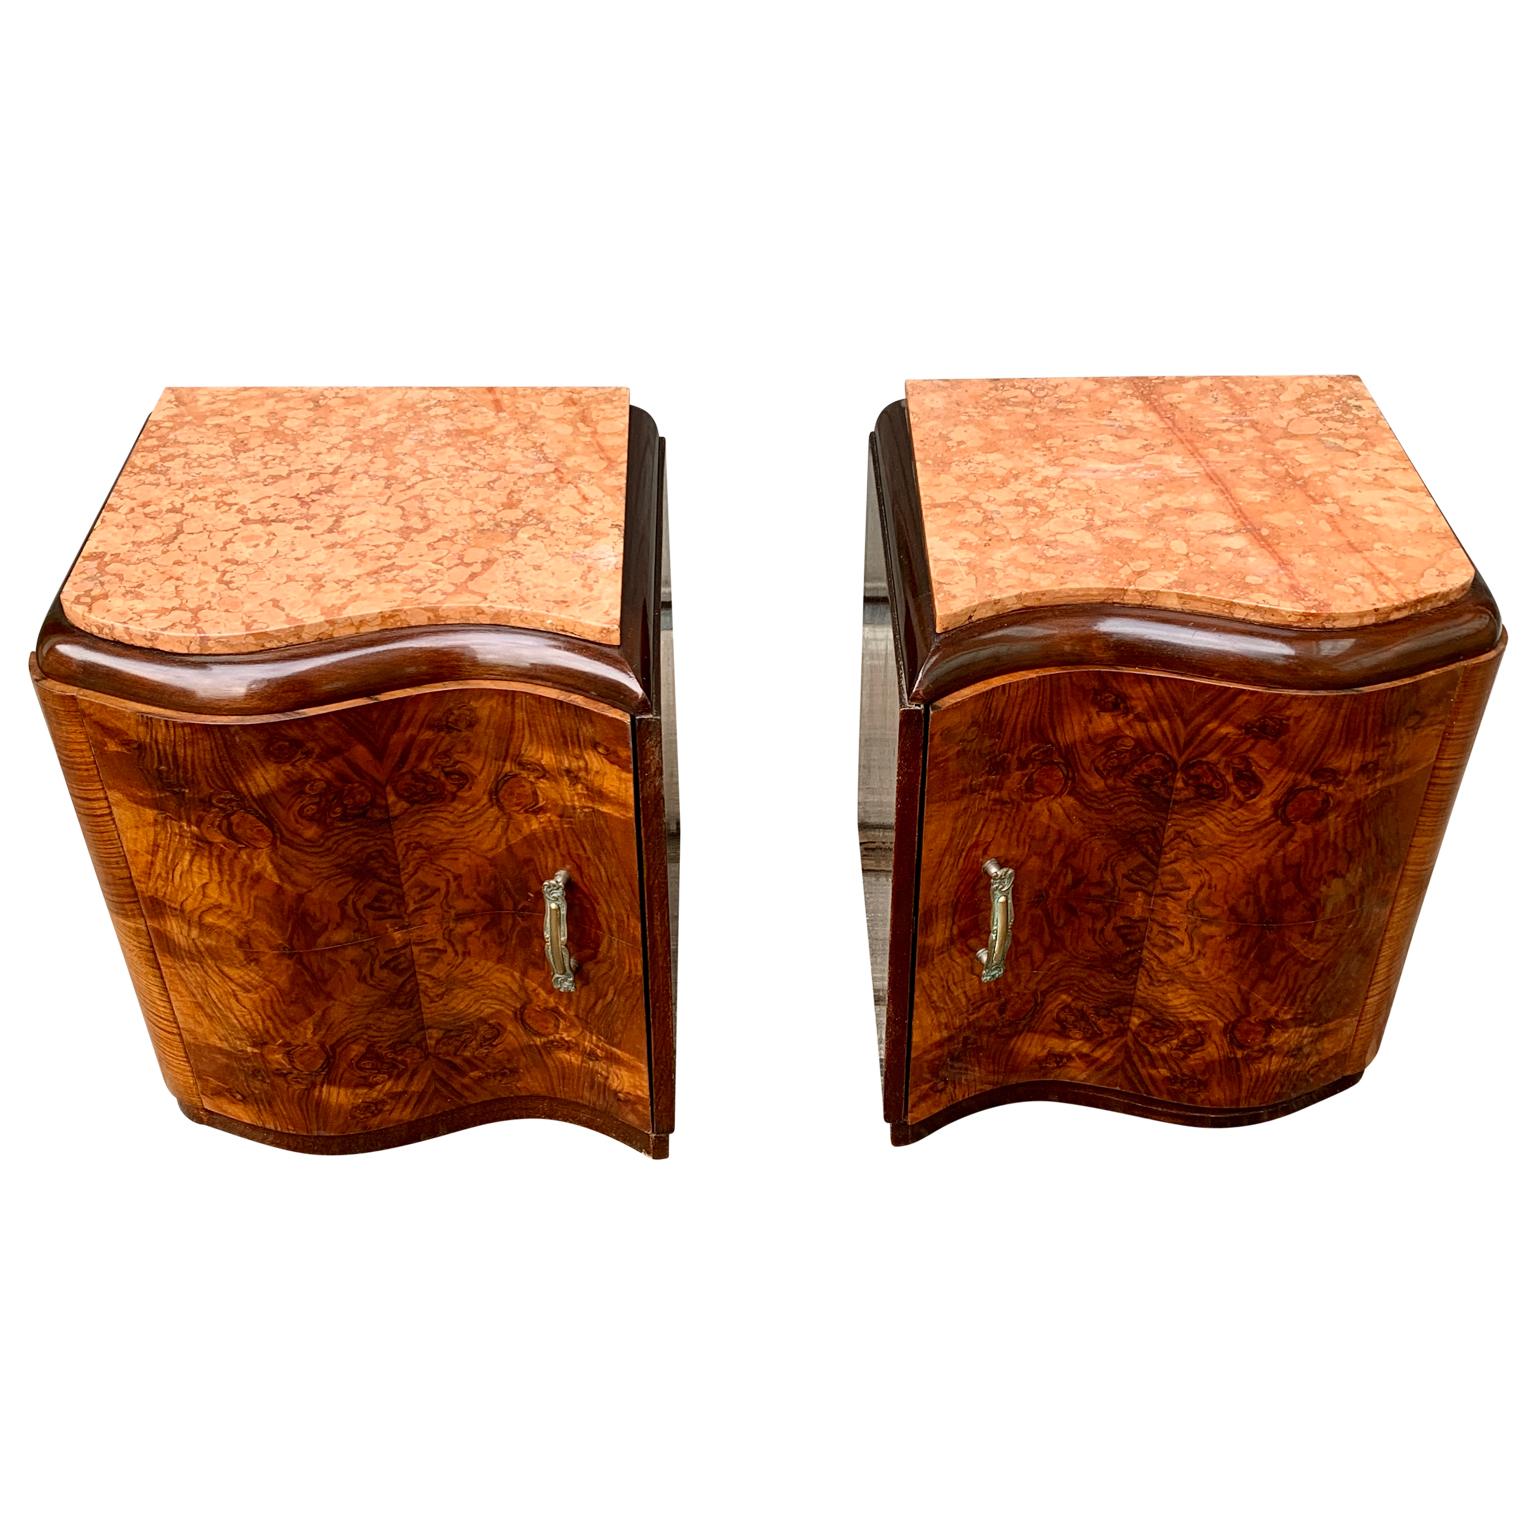 A charming pair of French nightstands or small night tables in walnut veneer wood and original hardware. The stone top is pink travertine.
This set is an honest pair, meaning that the set has left and right facing doors towards the cabinets, making